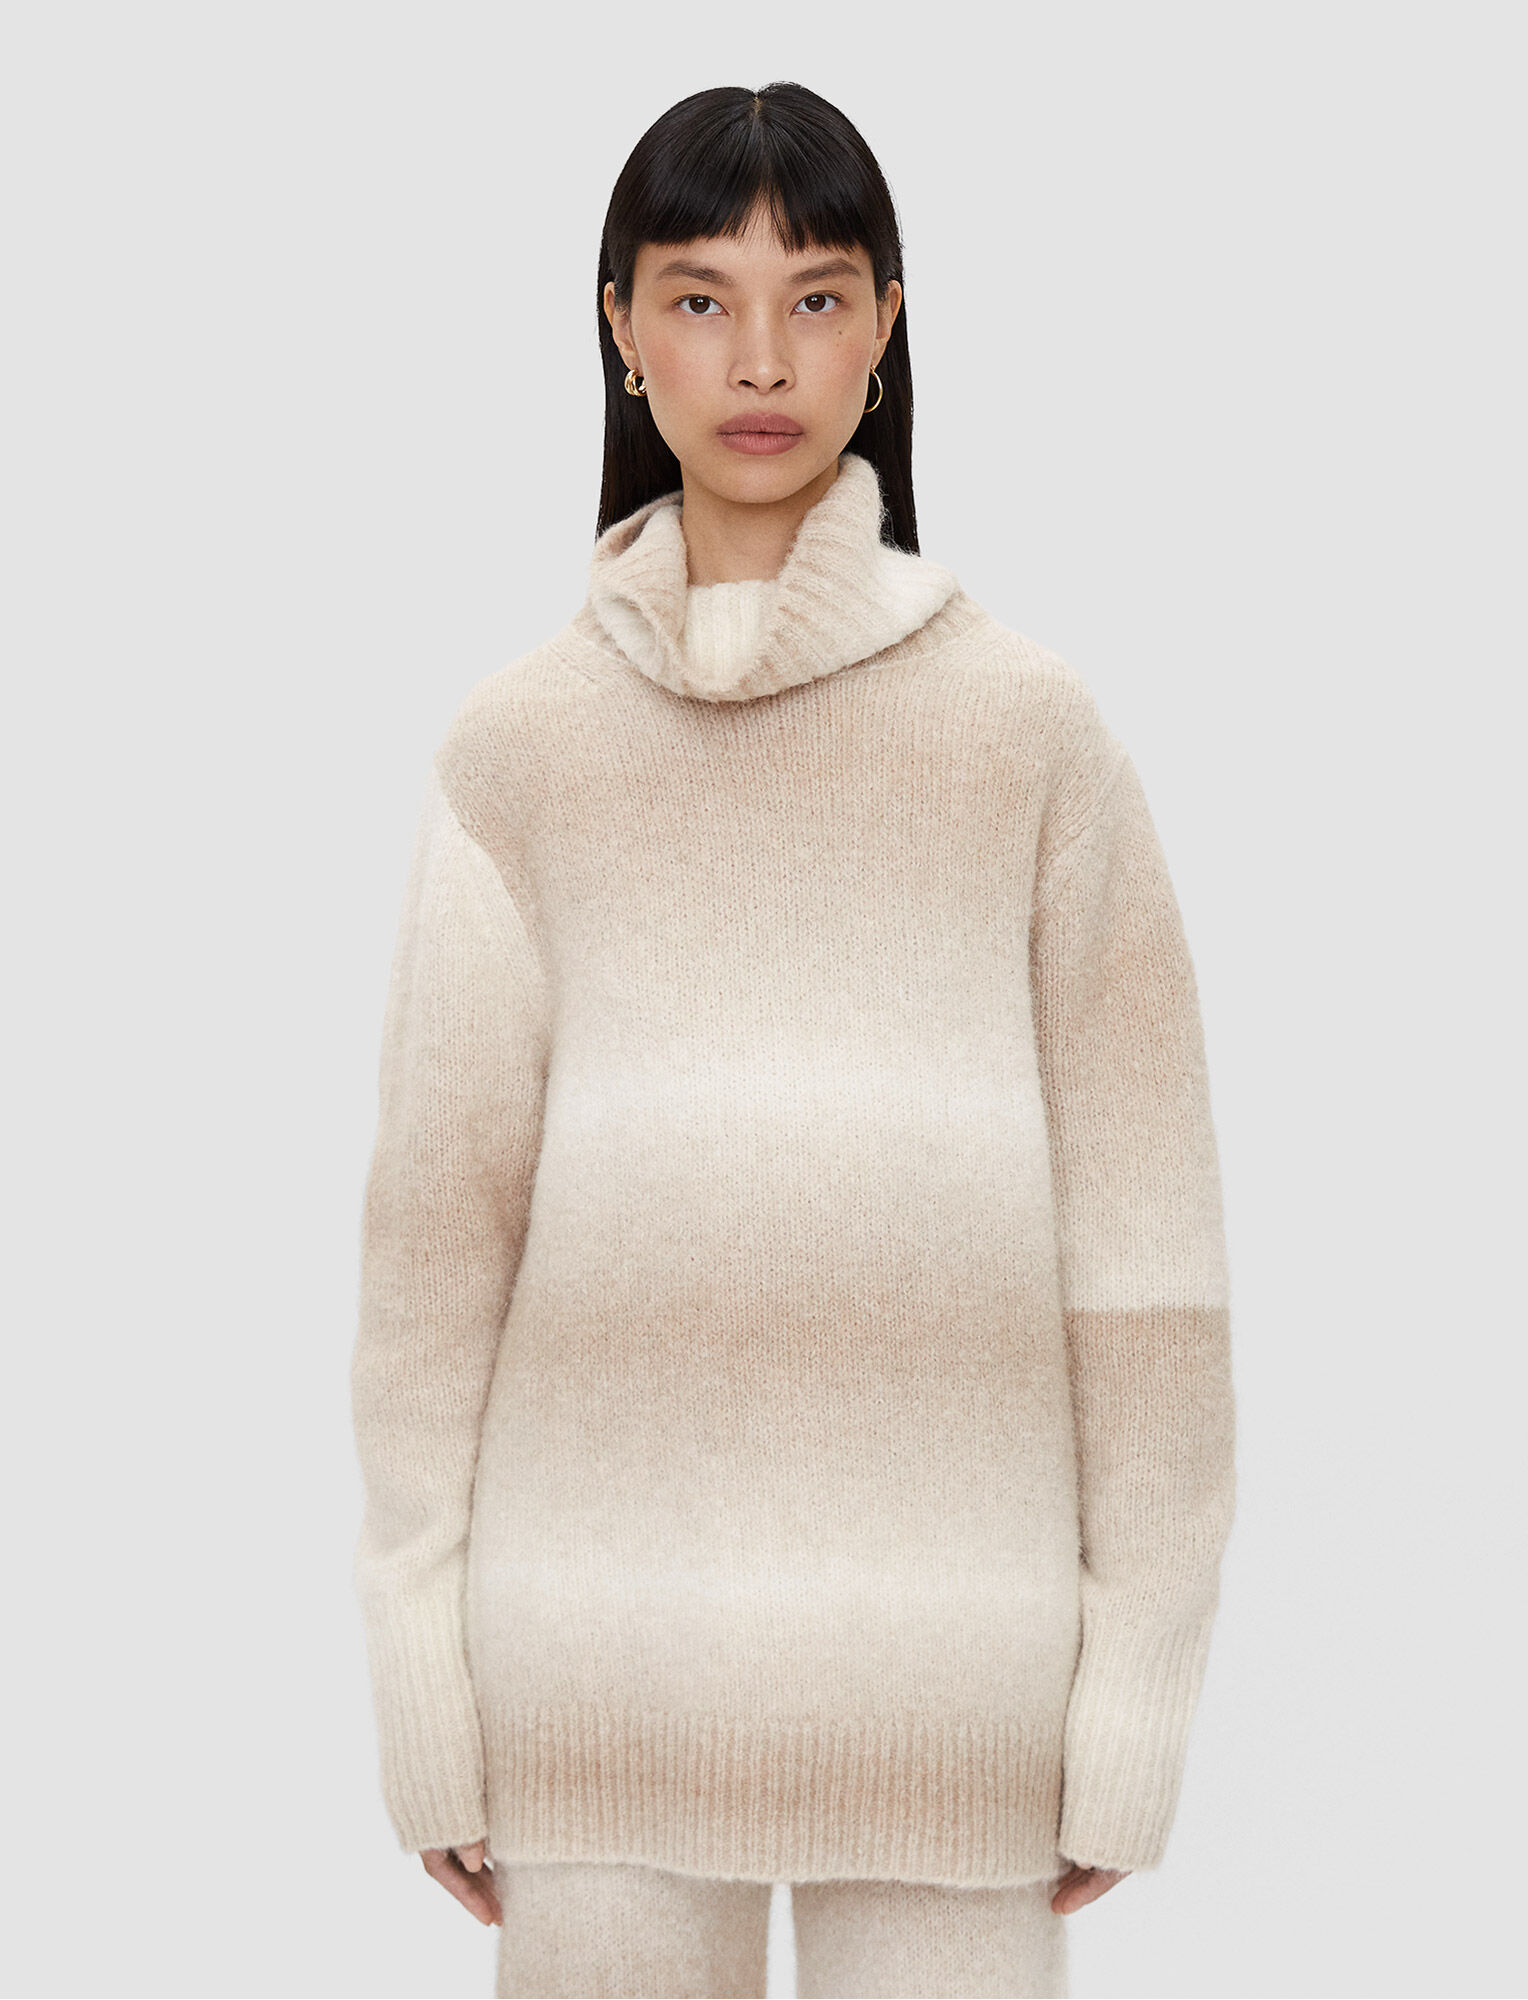 Joseph, Printed Knit High Neck Jumper, in Ivory